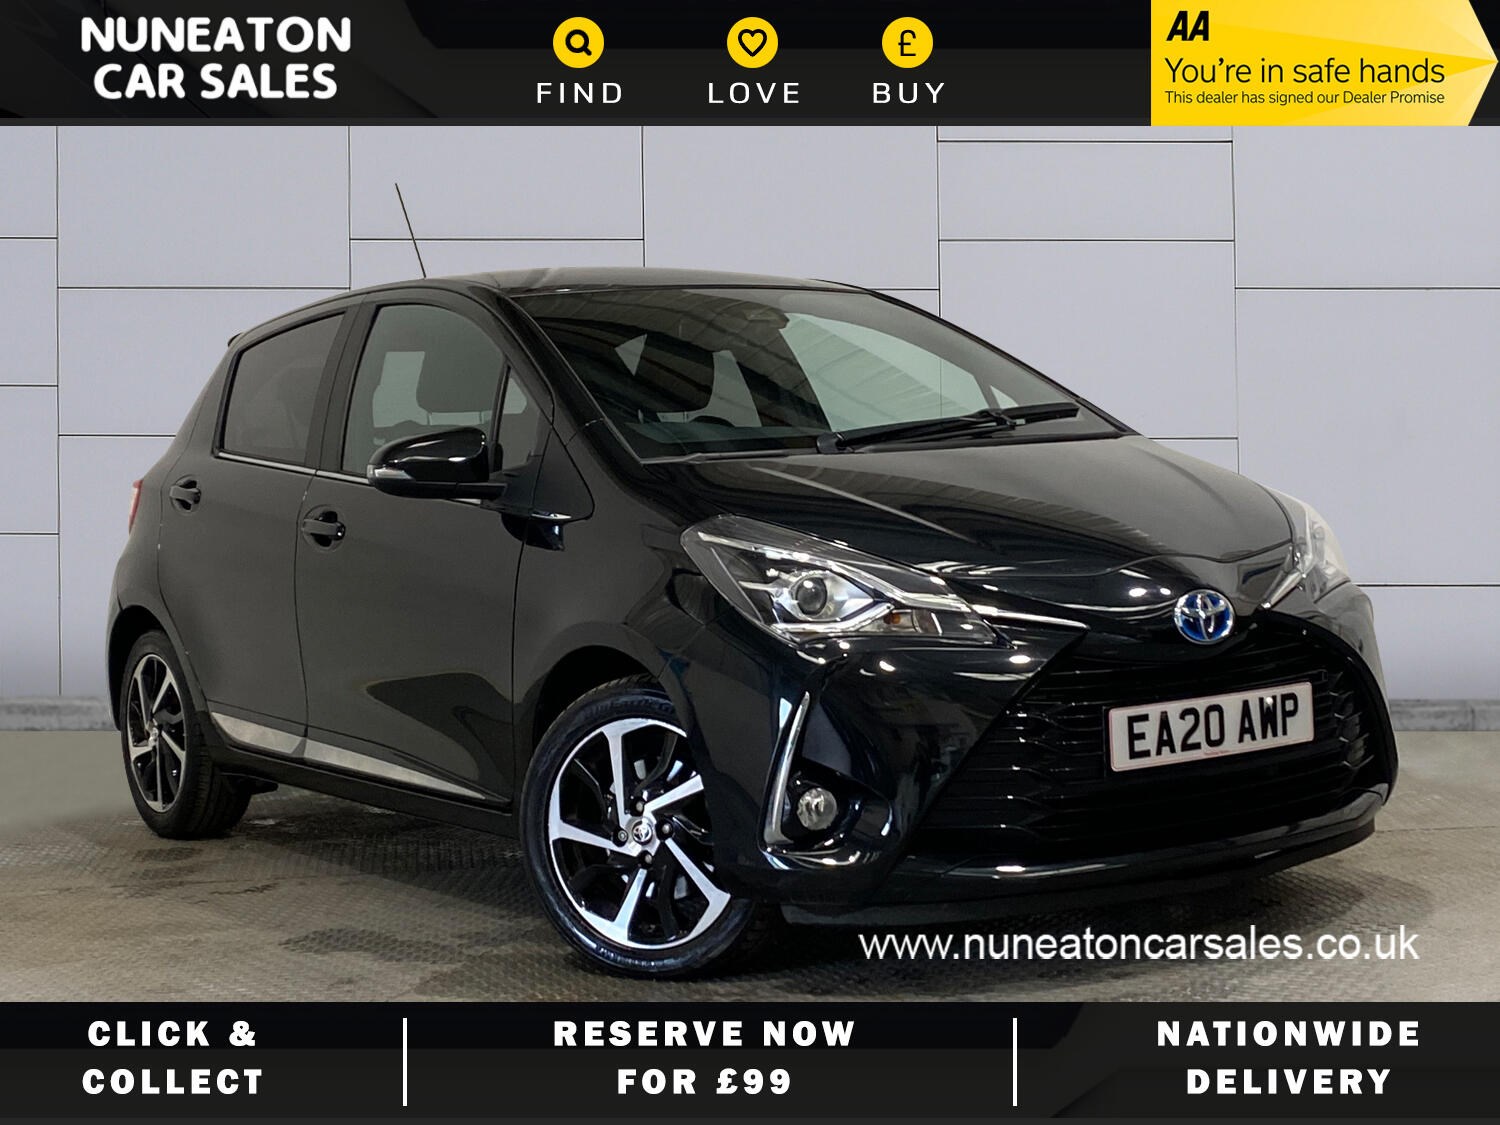 2020 used Toyota Yaris 1.5 VVT-h Excel